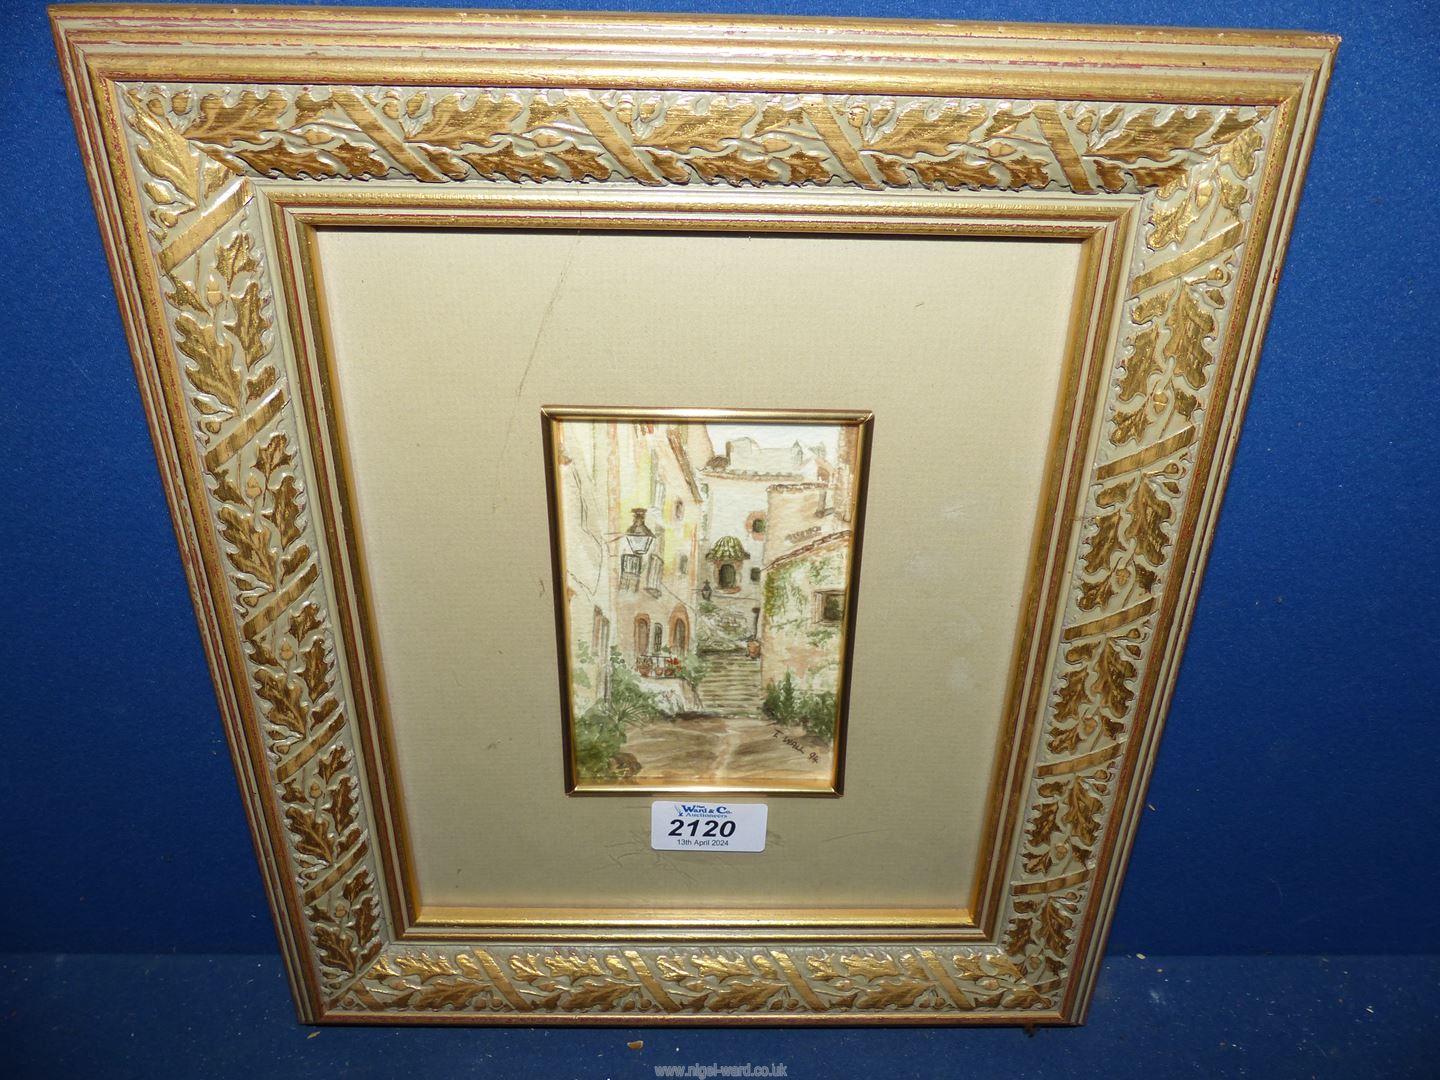 A framed and mounted Watercolour titled verso 'A Quiet Corner of Spain', signed lower right 'T.